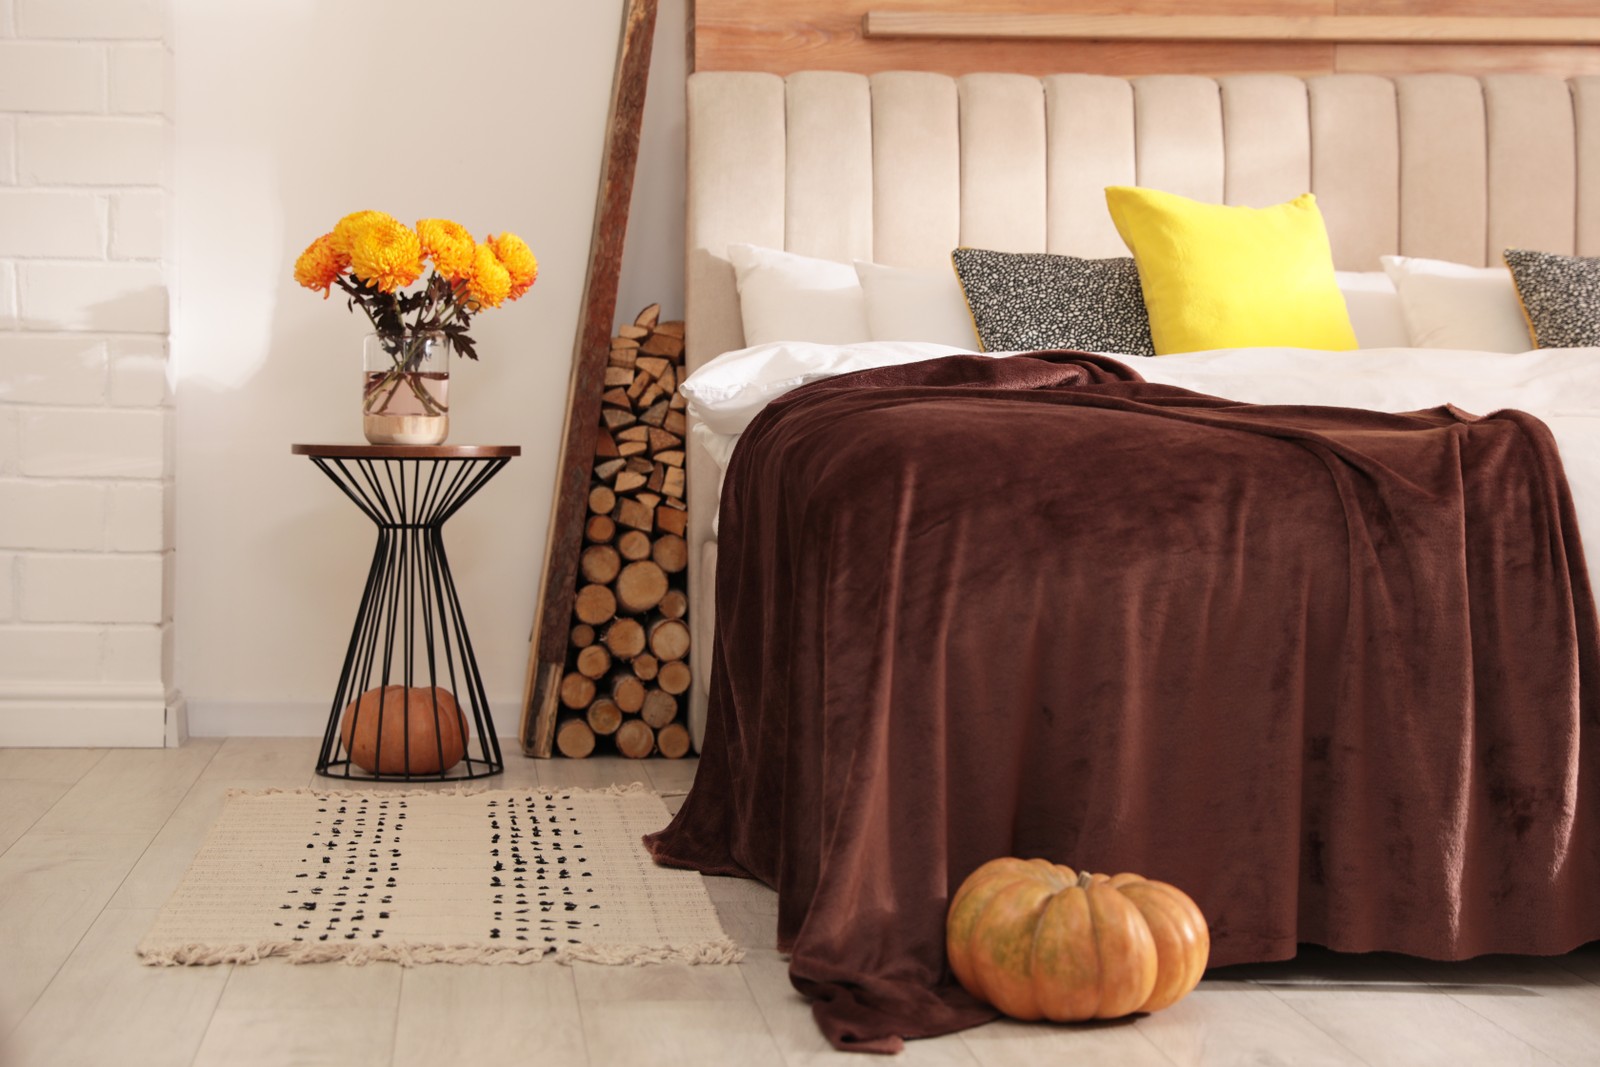 Photo of cozy bedroom interior inspired by autumn color scheme